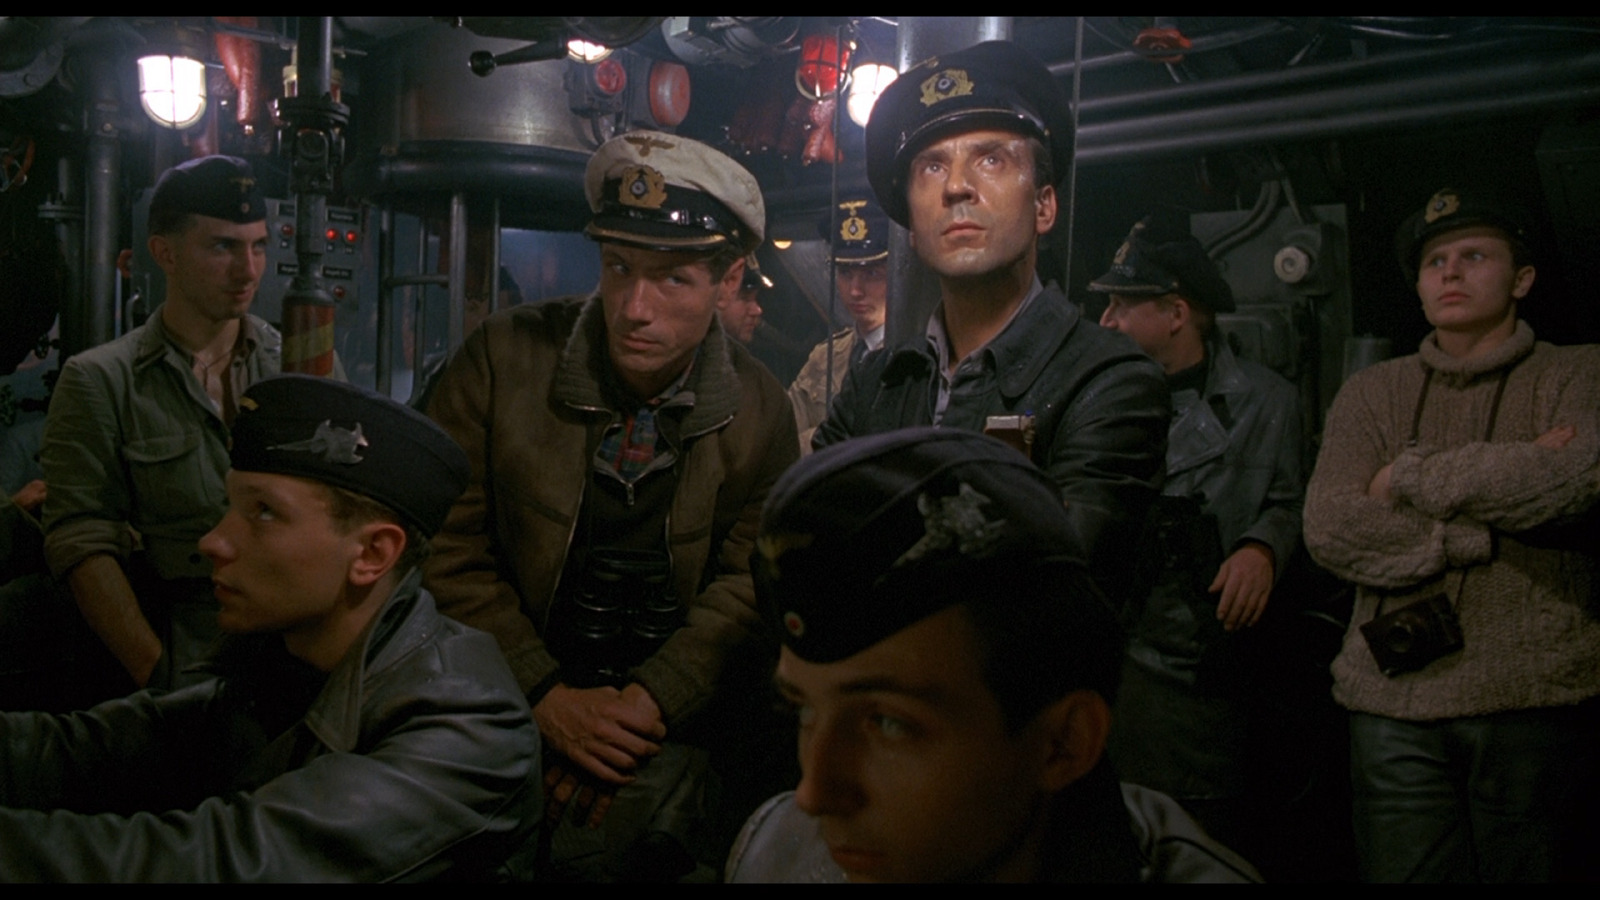 Das Boot (1981) movie review and Trivia • Spotter Up